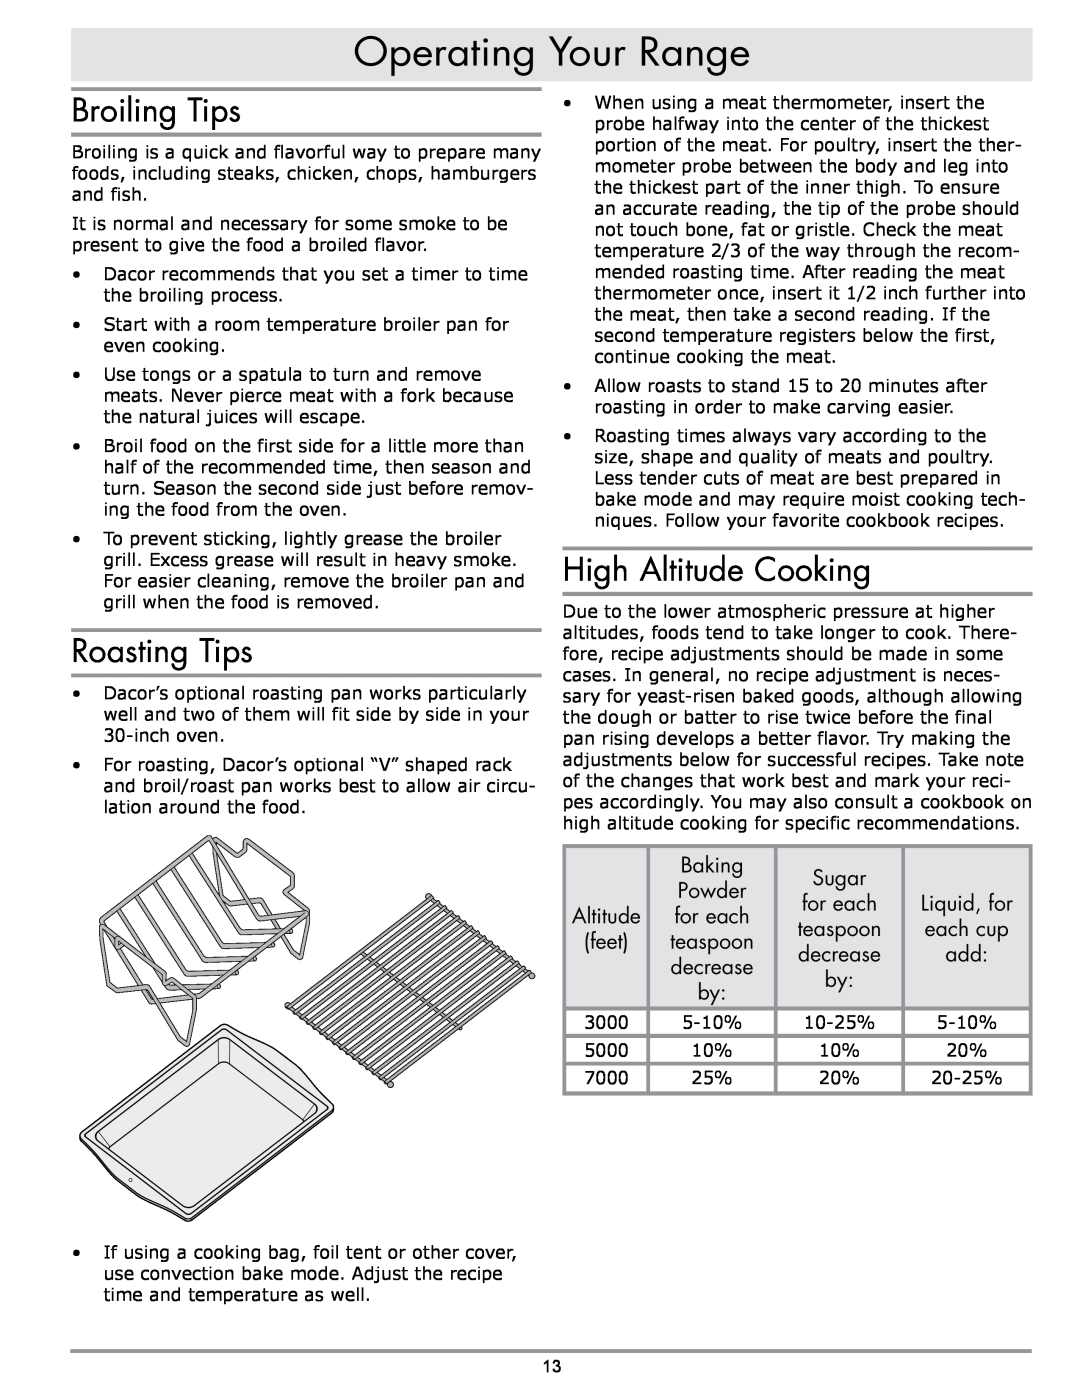 Sears ER30GI manual Broiling Tips, Roasting Tips, High Altitude Cooking, Operating Your Range 